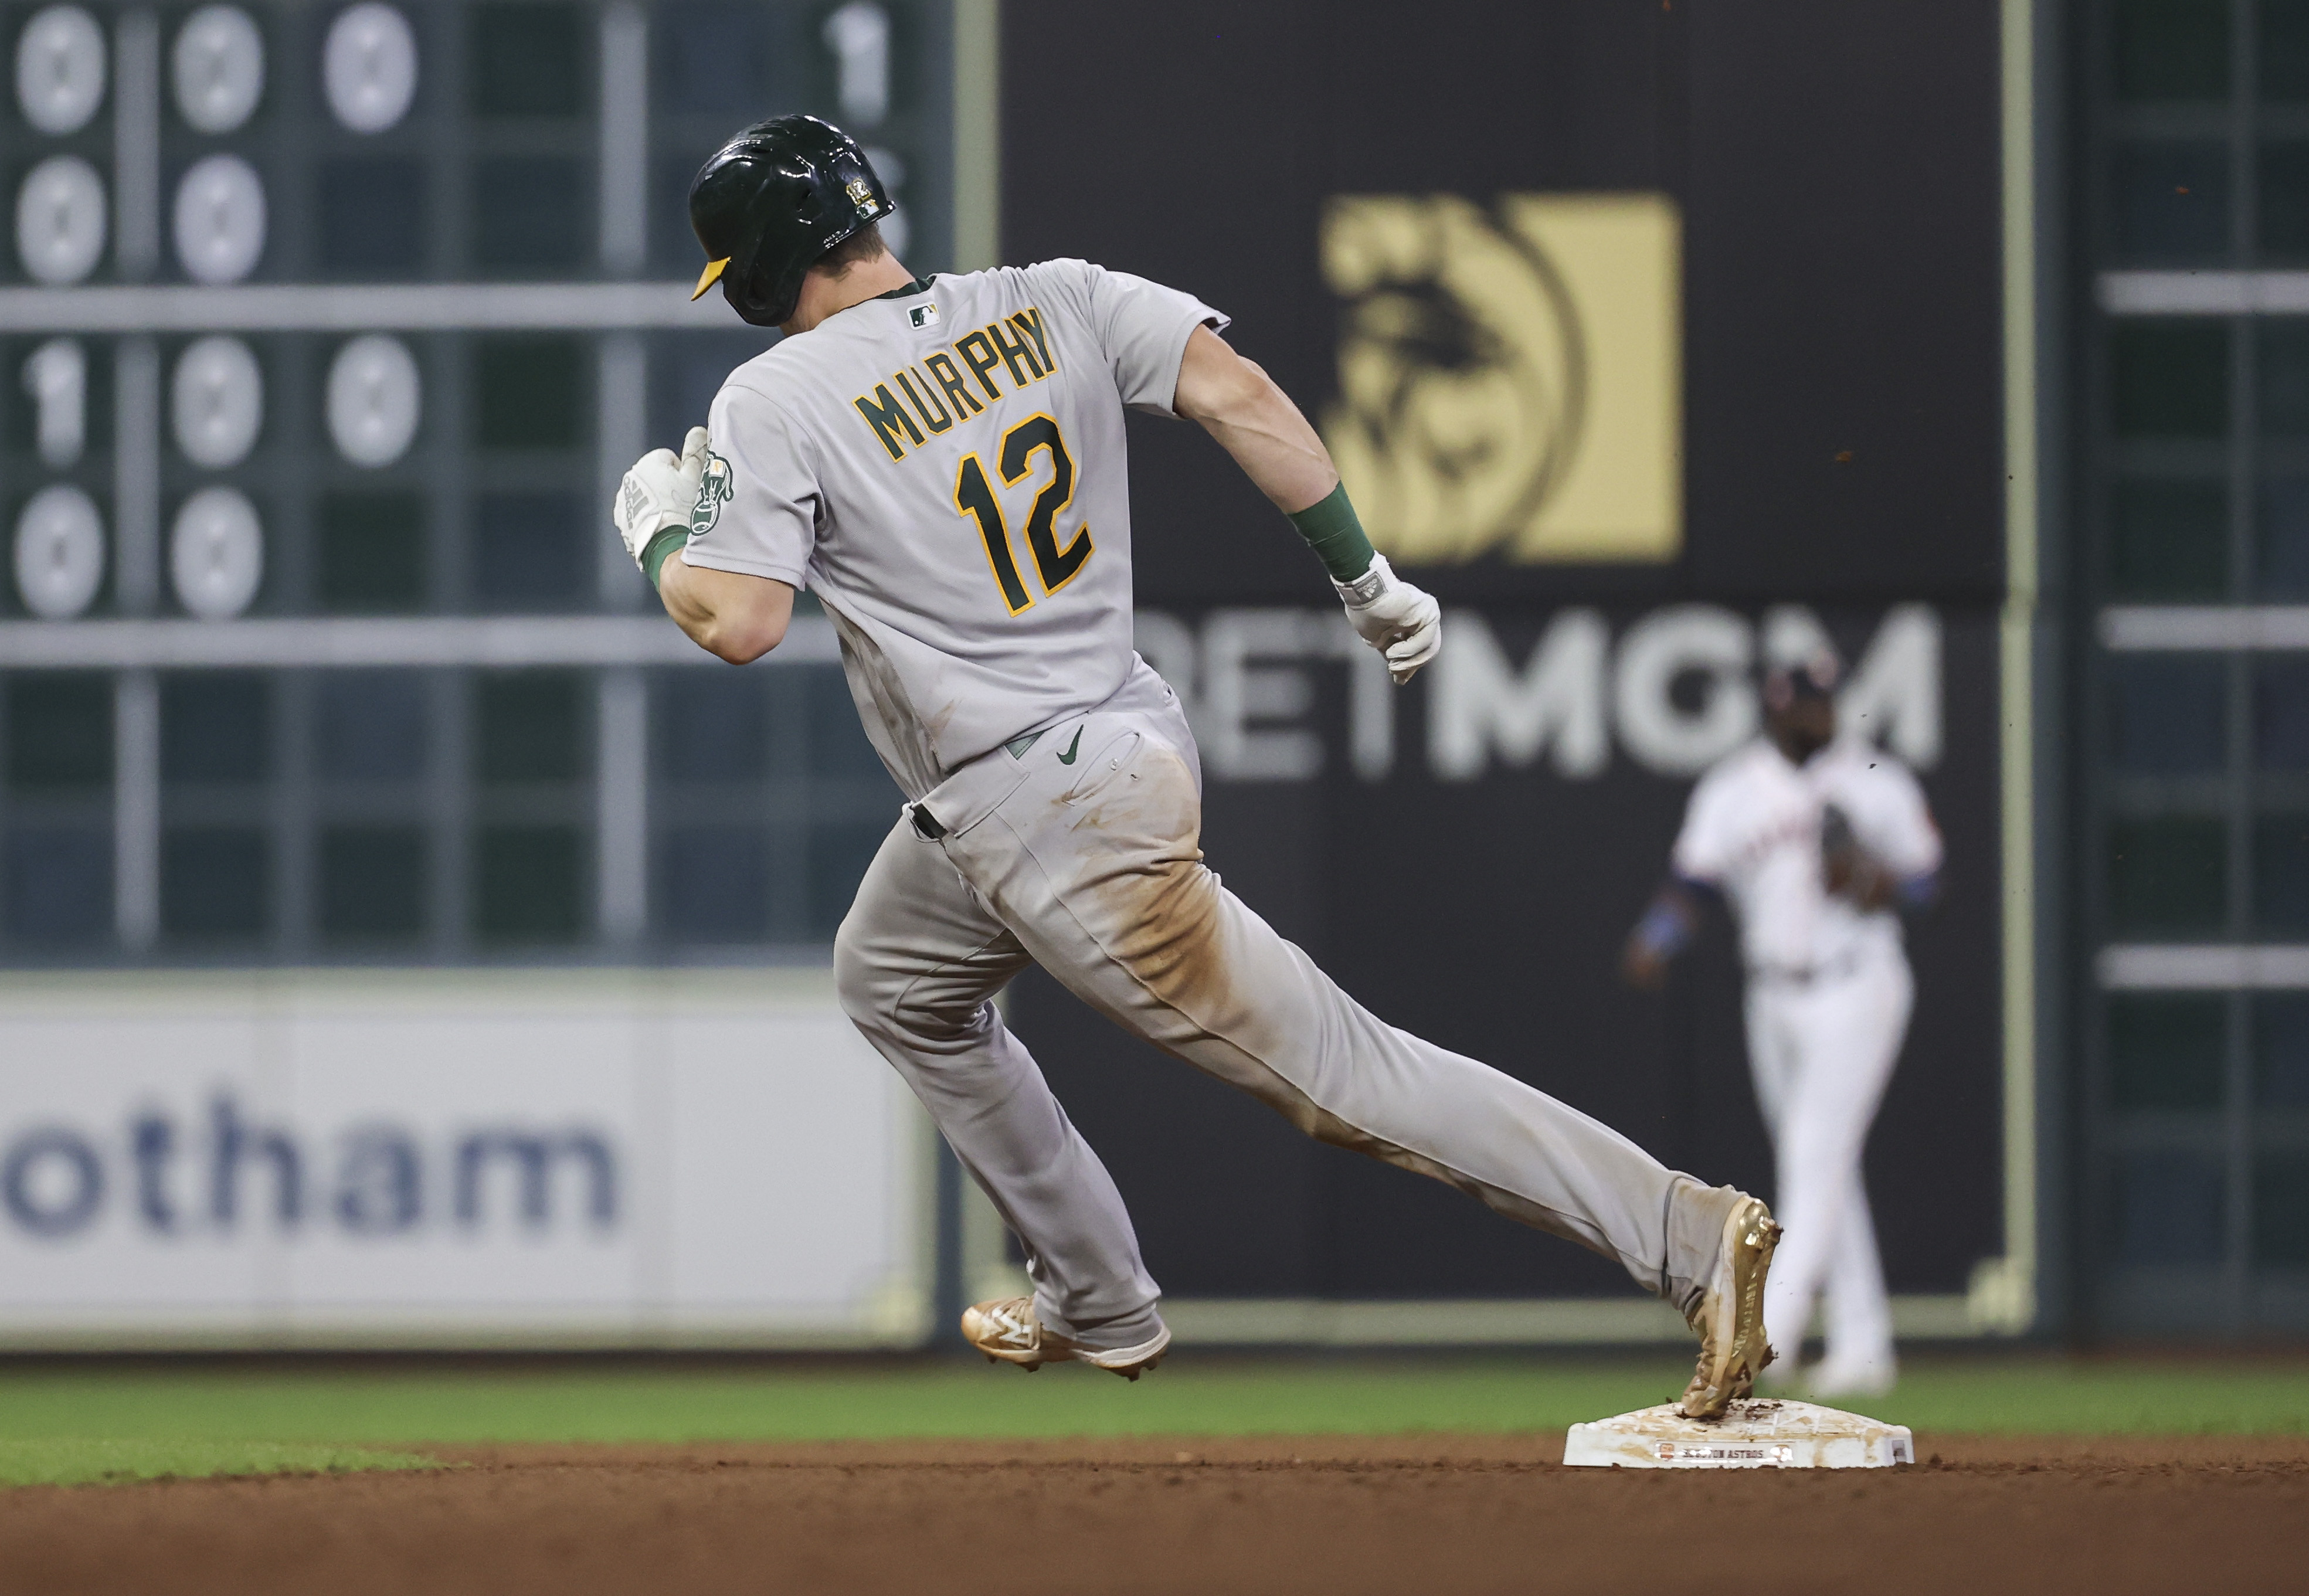 The Sean Murphy trade is off to a rocky start for the Athletics